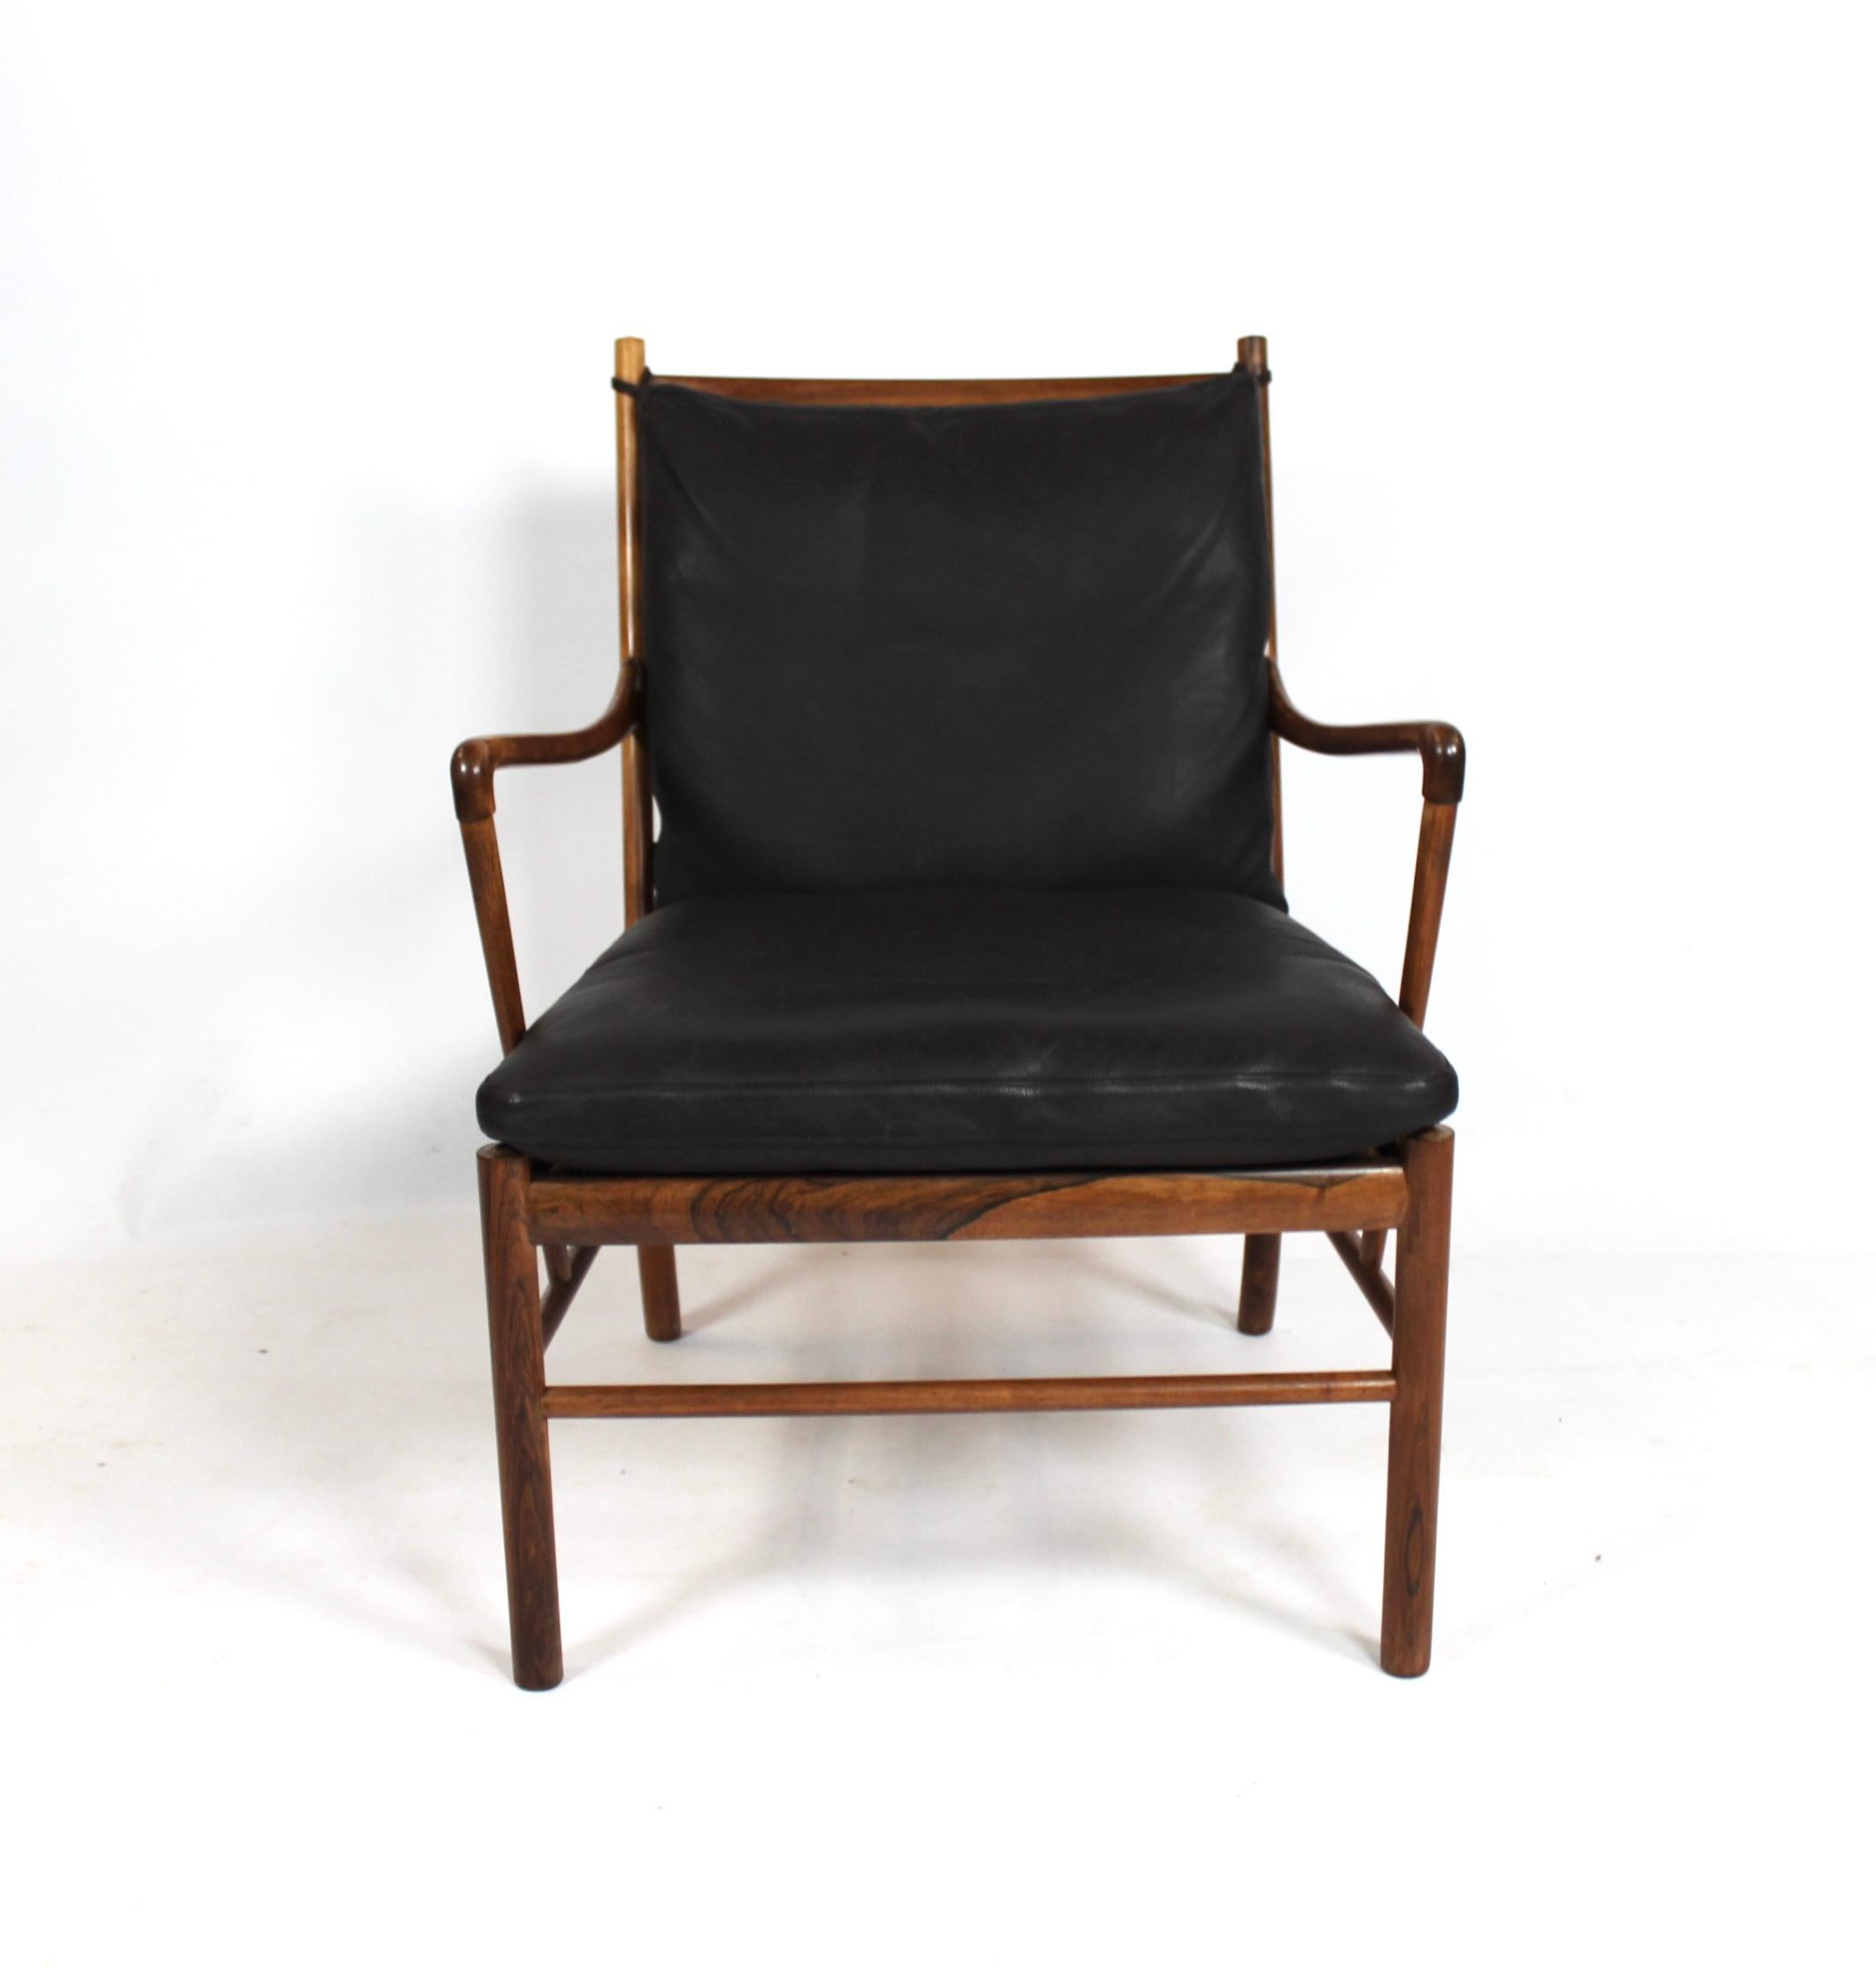 Scandinavian Modern Pair of Colonial Easy Chairs, Model PJ149, by Ole Wanscher